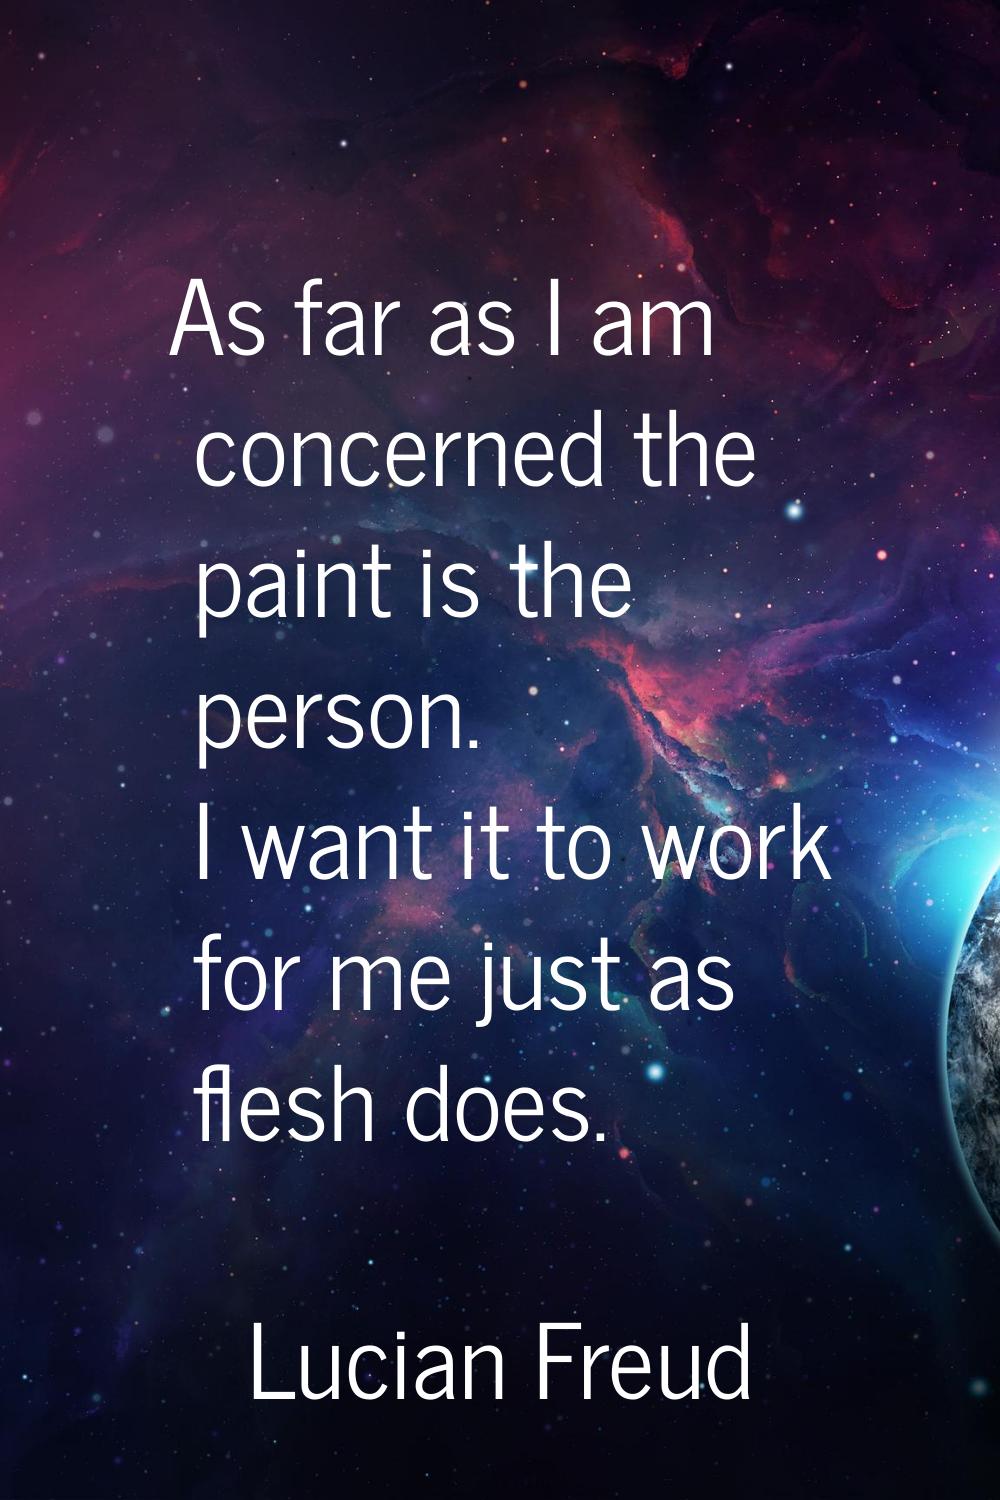 As far as I am concerned the paint is the person. I want it to work for me just as flesh does.